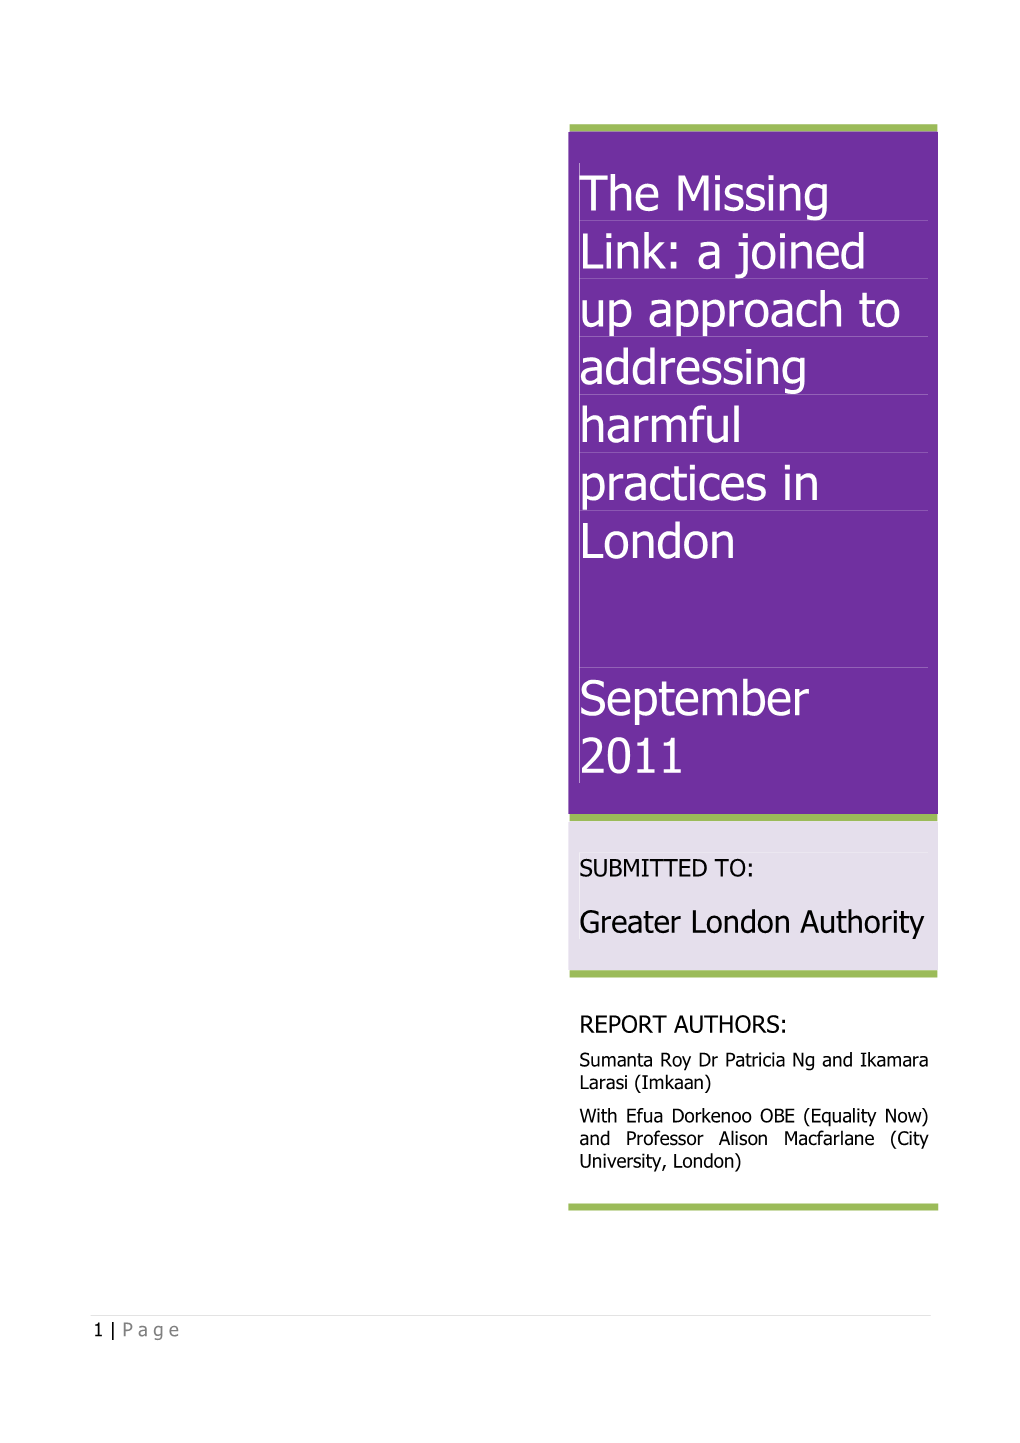 The Missing Link: a Joined up Approach to Addressing Harmful Practices in London